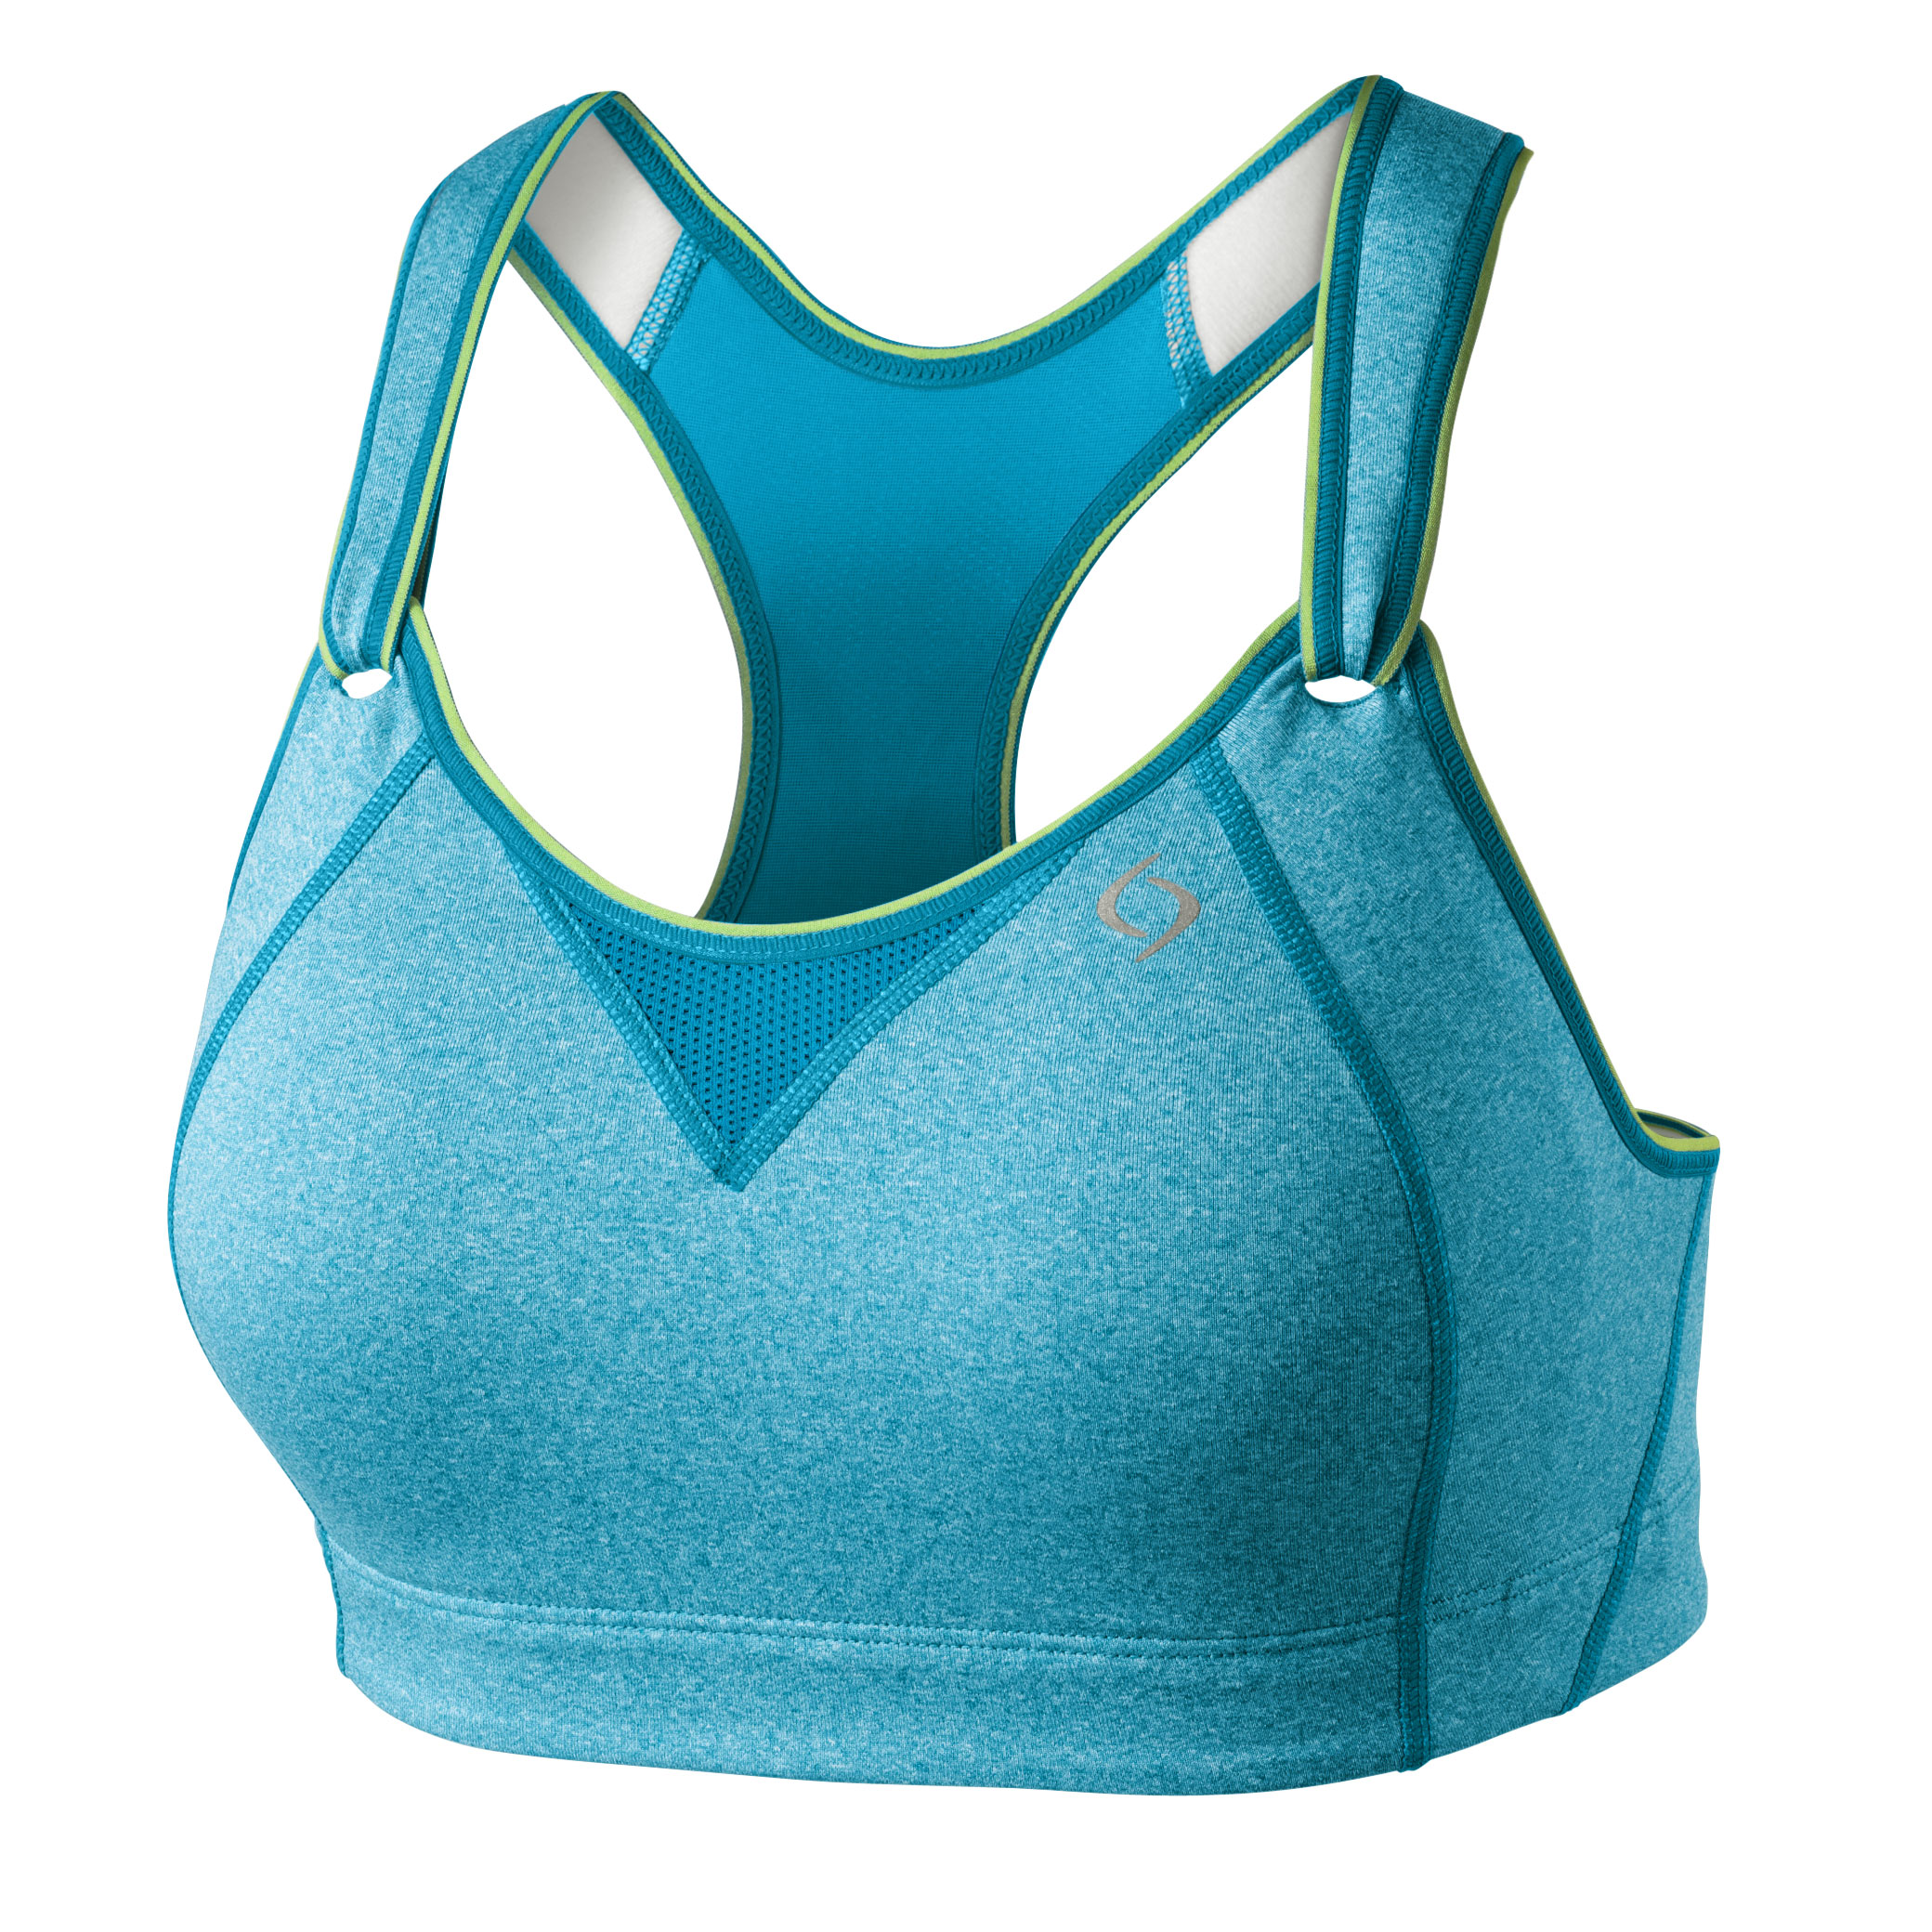 If You Can't Move It, Climb It: Kit Review : Tesco Sports Bra